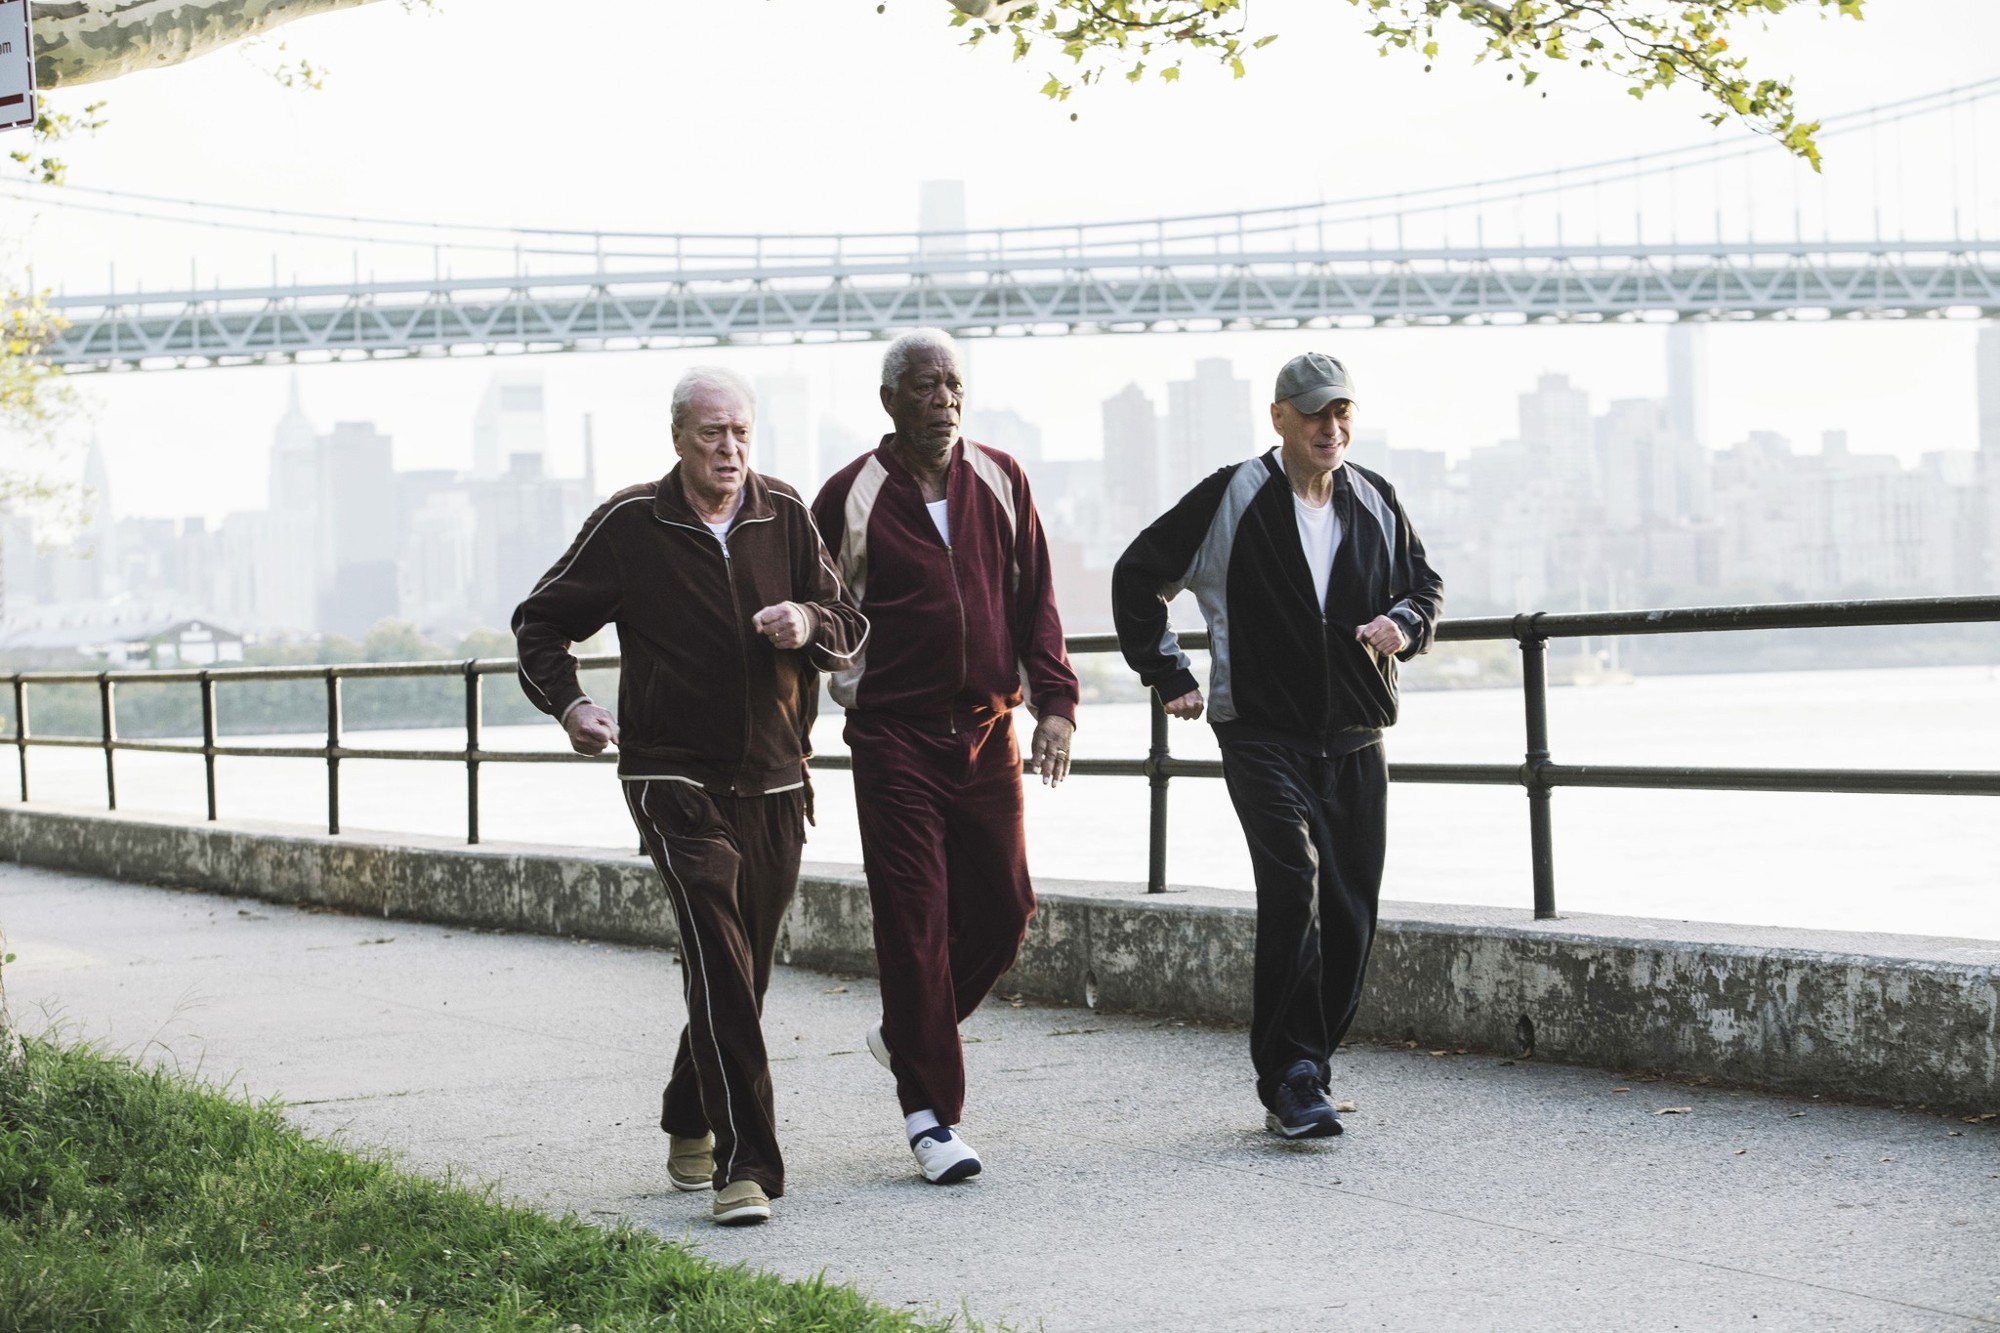 Michael Caine, Morgan Freeman and Alan Arkin in Warner Bros. Pictures' Going in Style (2017)